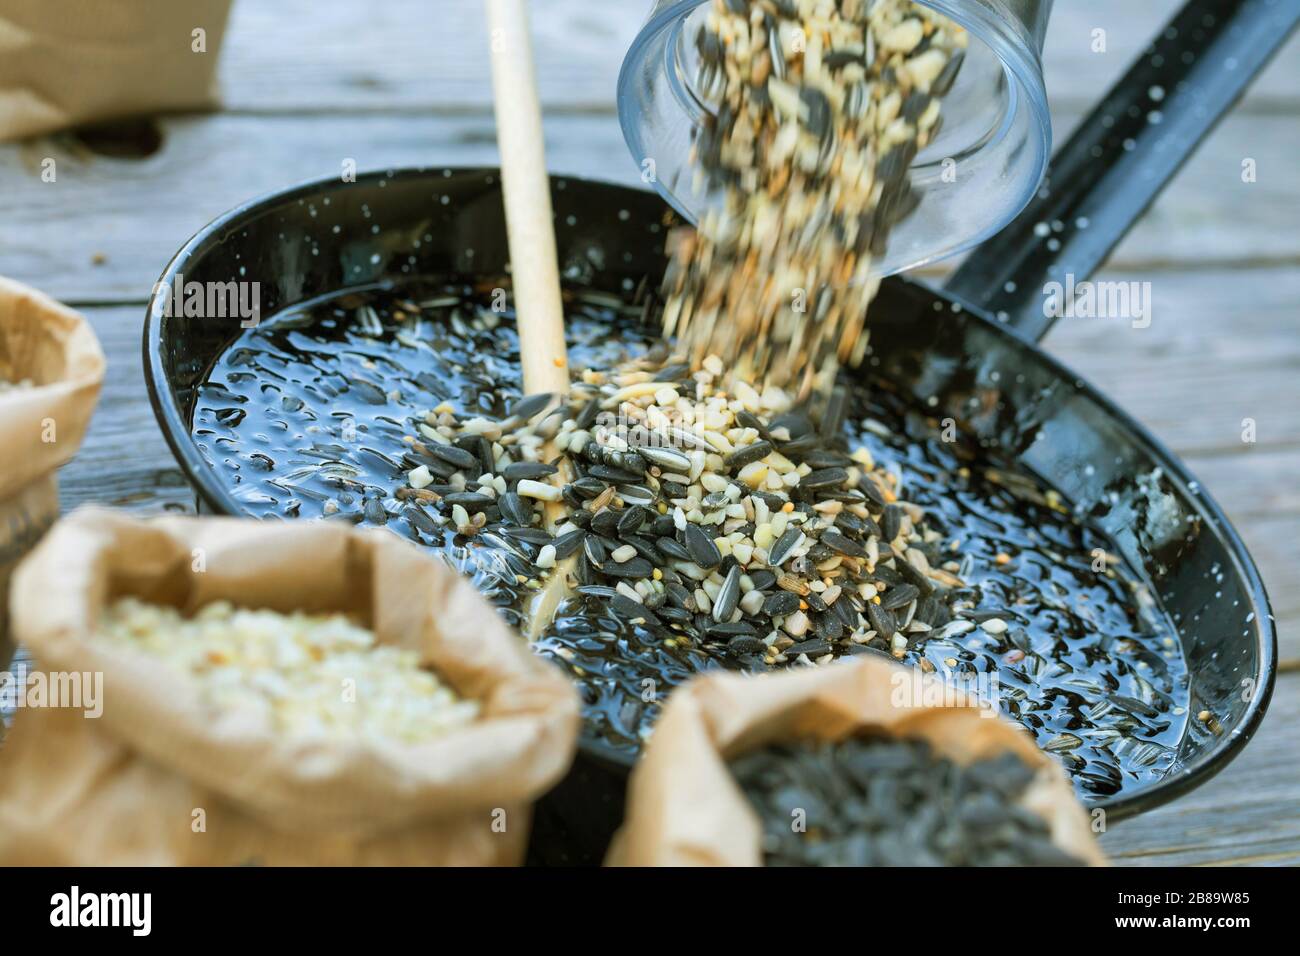 Homemade fat fodder, ingredients: hardened coconut oil, sunflower seeds, peanuts, seed mix and sunflower oil was melted and seed mix added, Germany Stock Photo